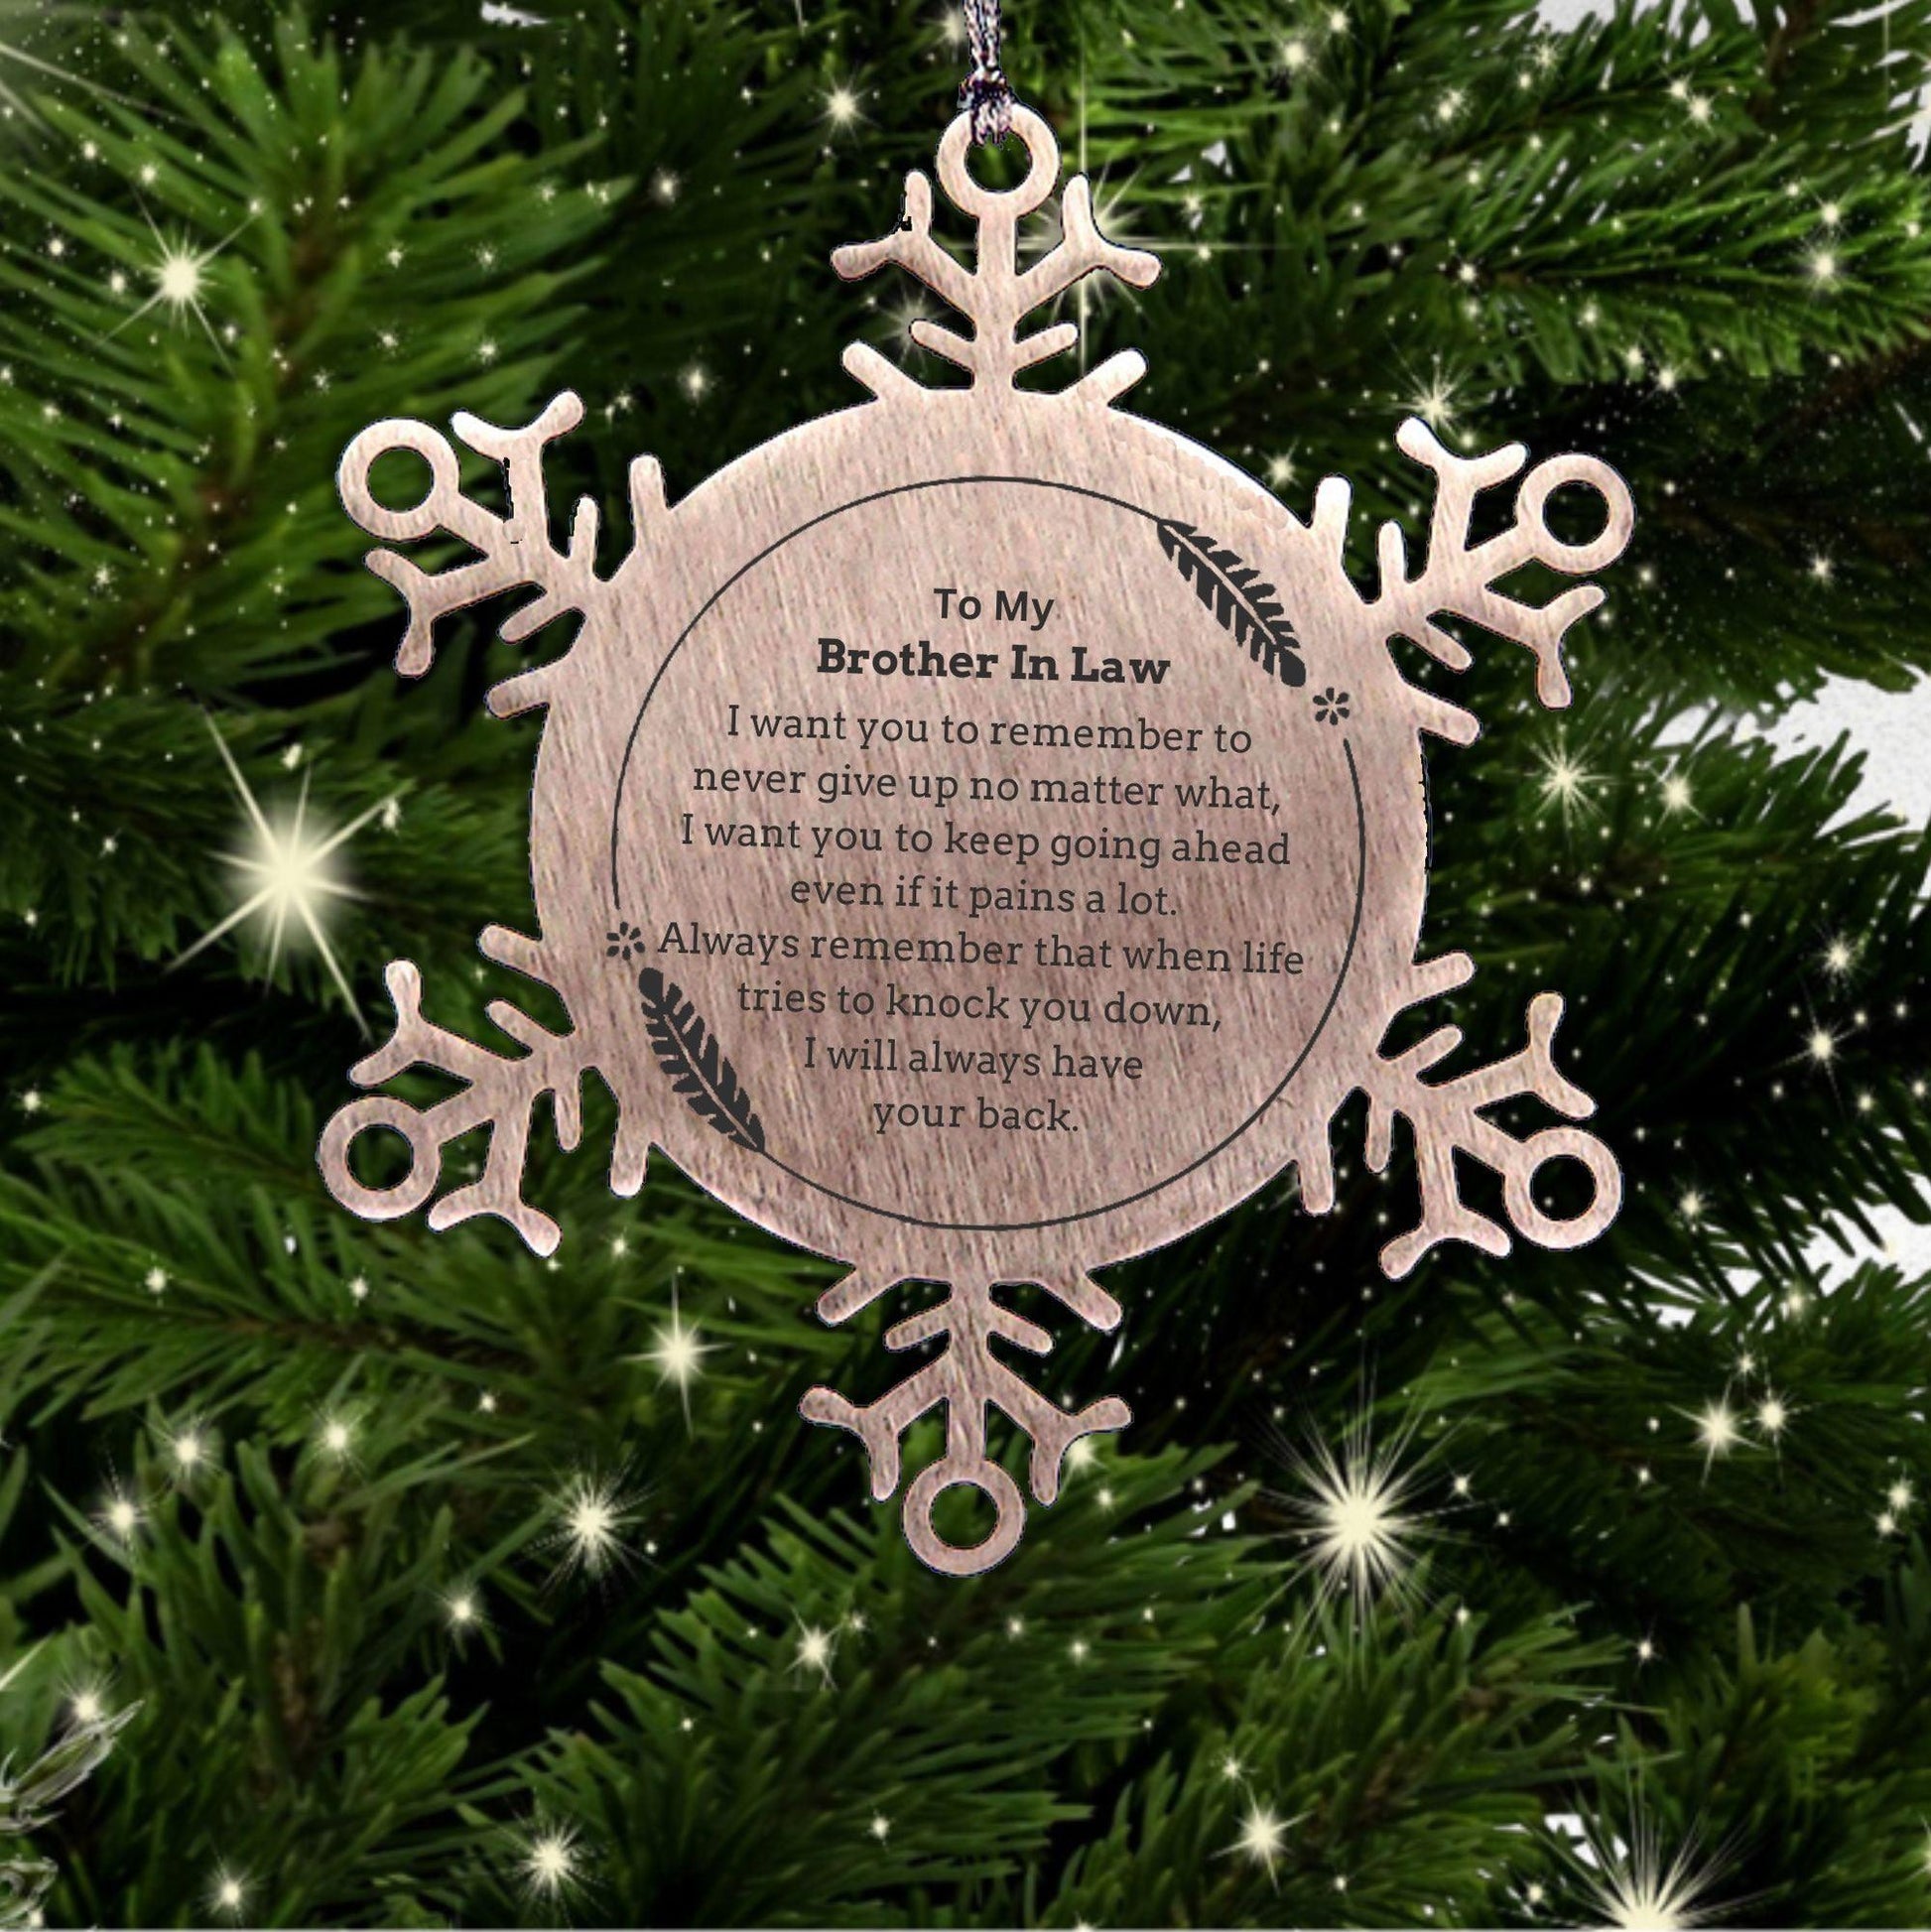 To My Brother In Law Gifts, Never give up no matter what, Inspirational Brother In Law Snowflake Ornament, Encouragement Birthday Christmas Unique Gifts For Brother In Law - Mallard Moon Gift Shop